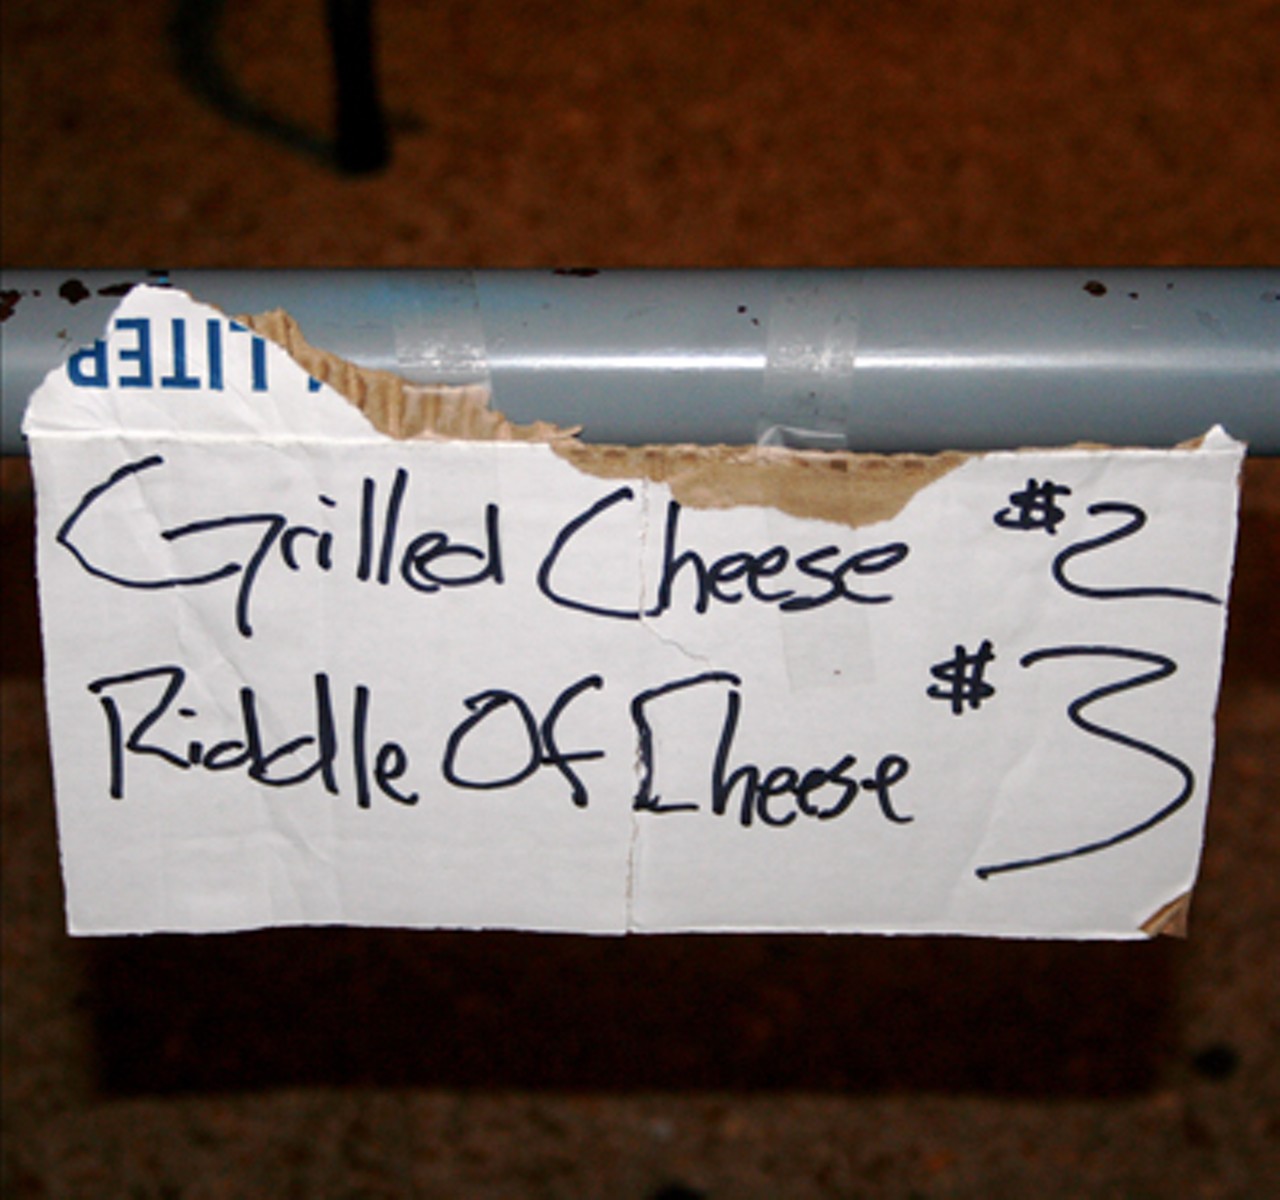 Rock-themed food was being served outside. A Riddle of Cheese is a grilled cheese with a hot dog inside, I am told...